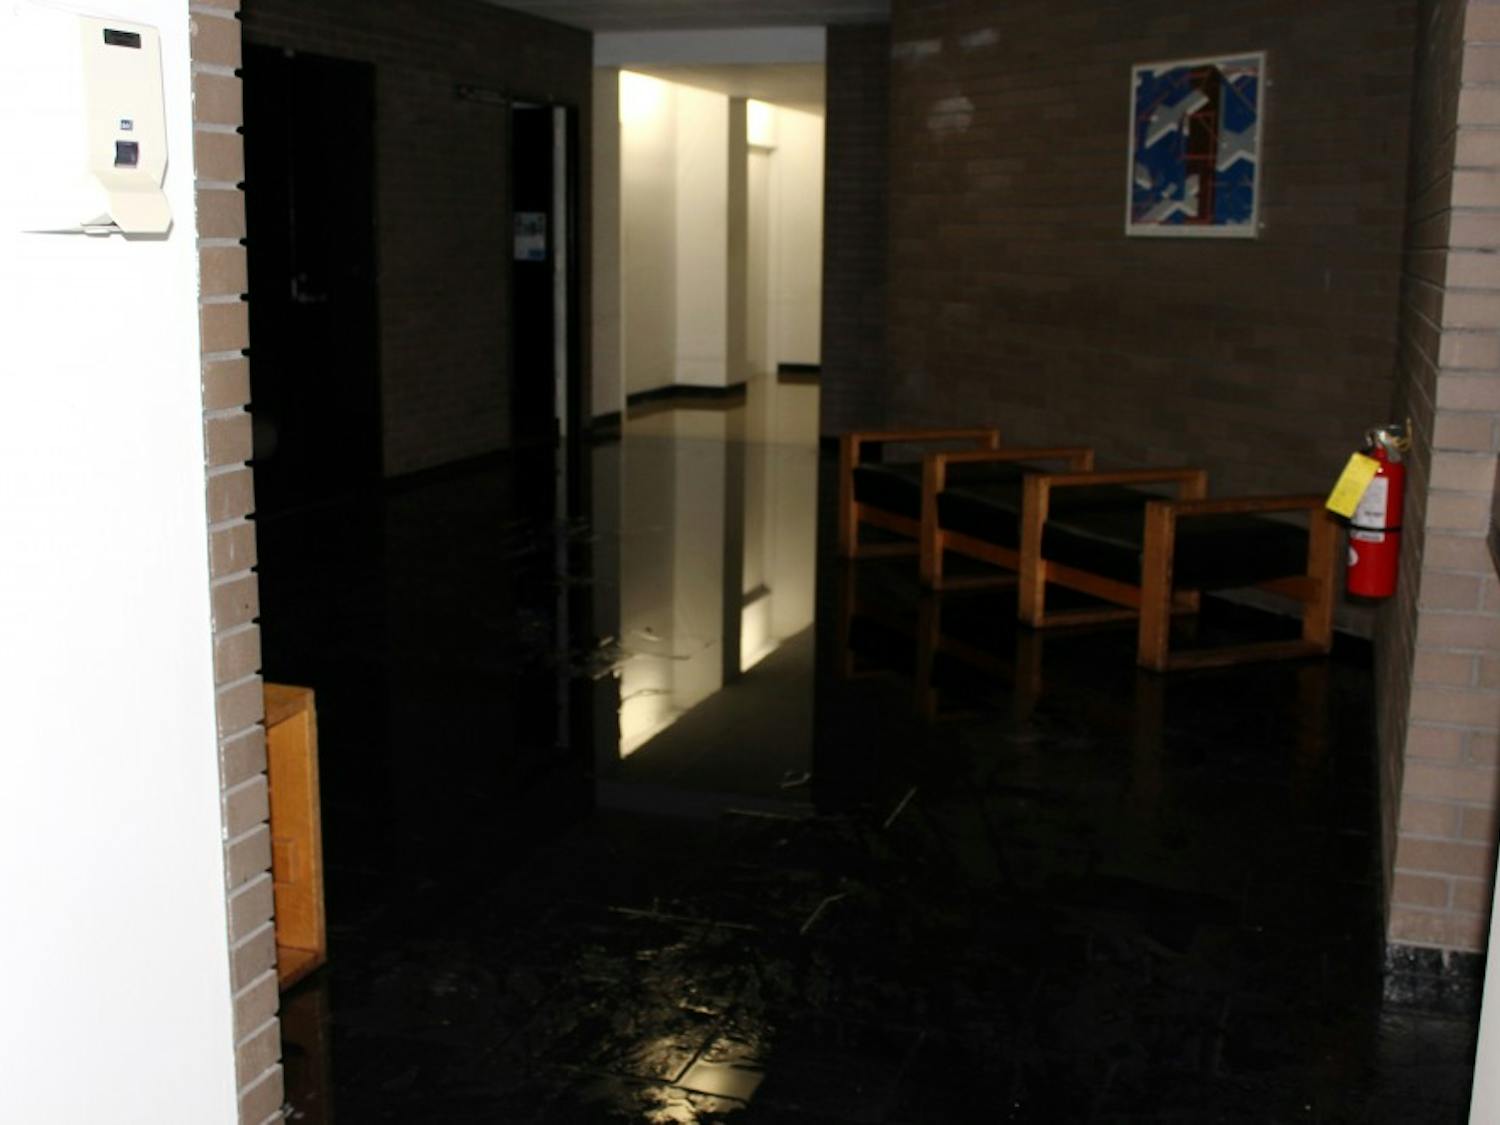 The fourth floor lobby of Clemens hall is flooded as a  result of a burst water valve on the fourth floor cooling system.